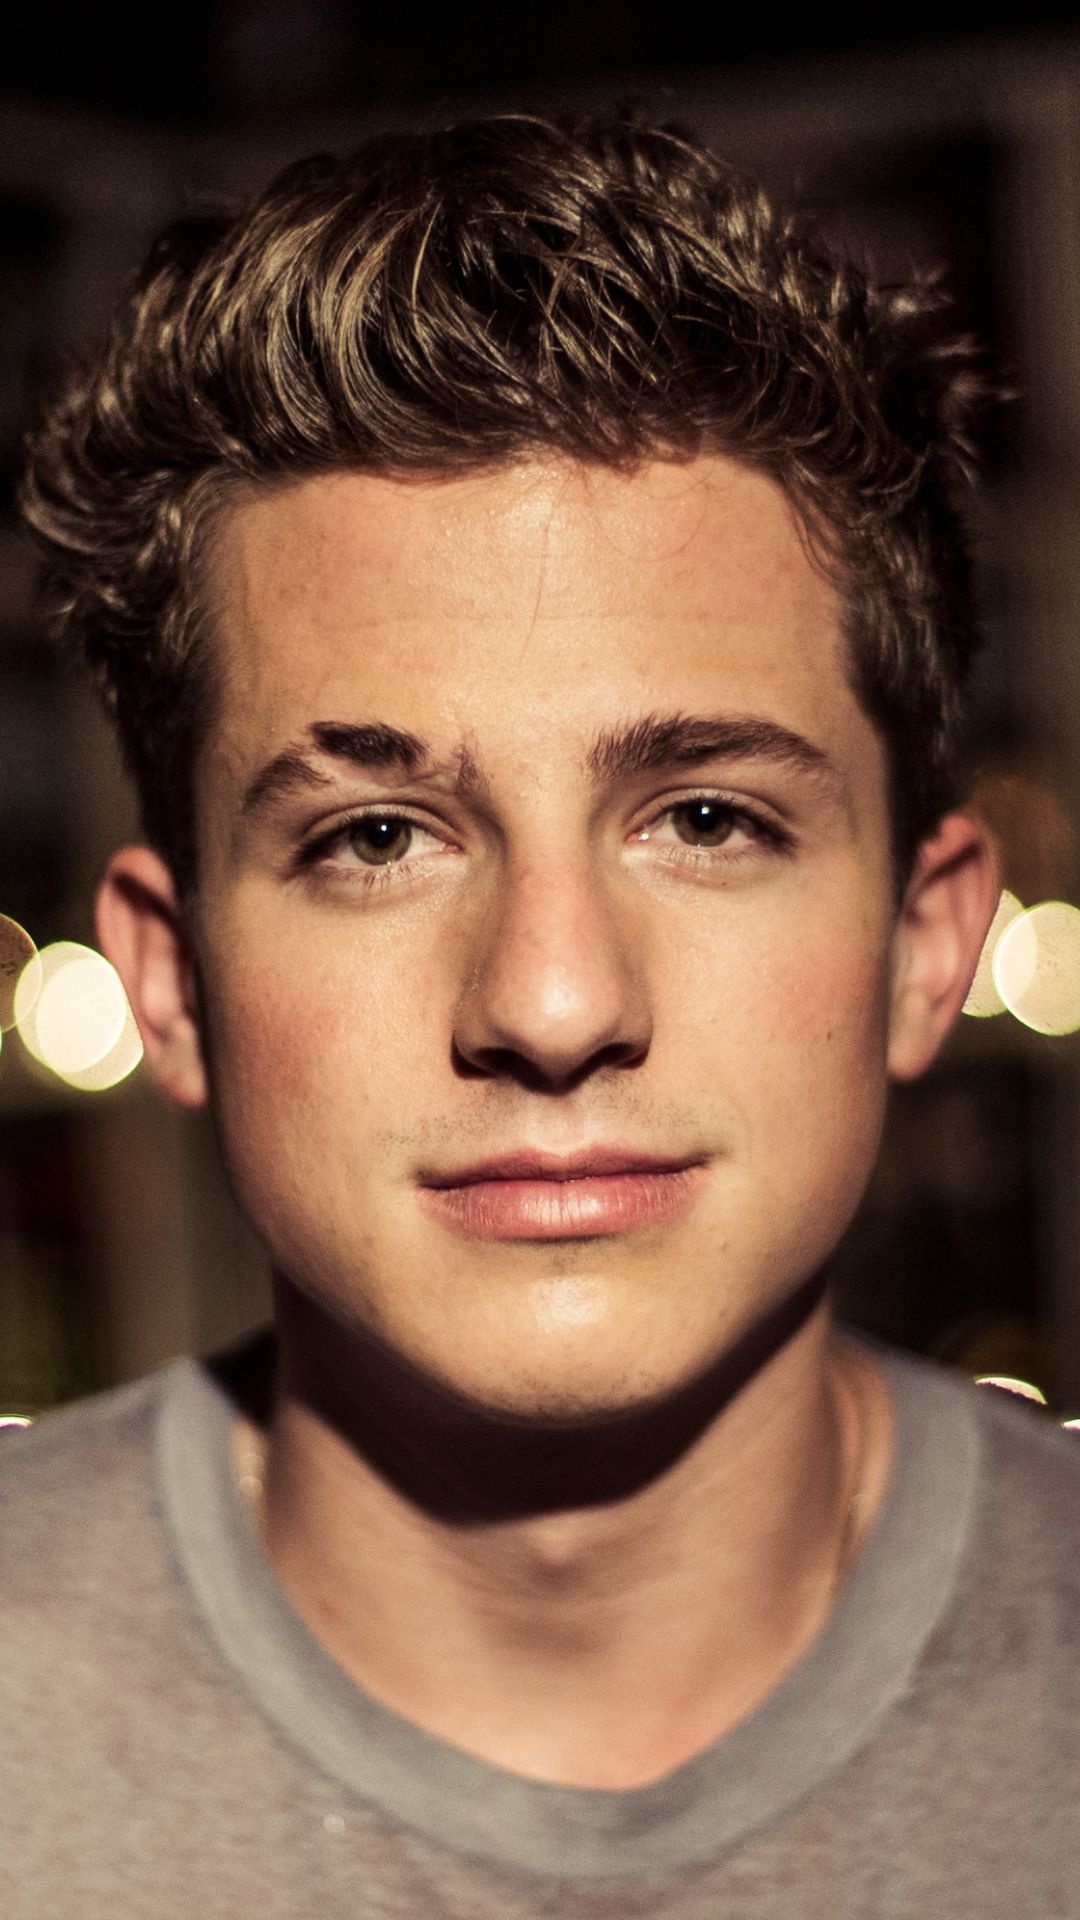 Charlie Puth: Worked with a variety of other artists including Wiz Khalifa, Kehlani, Selena Gomez. 1080x1920 Full HD Background.